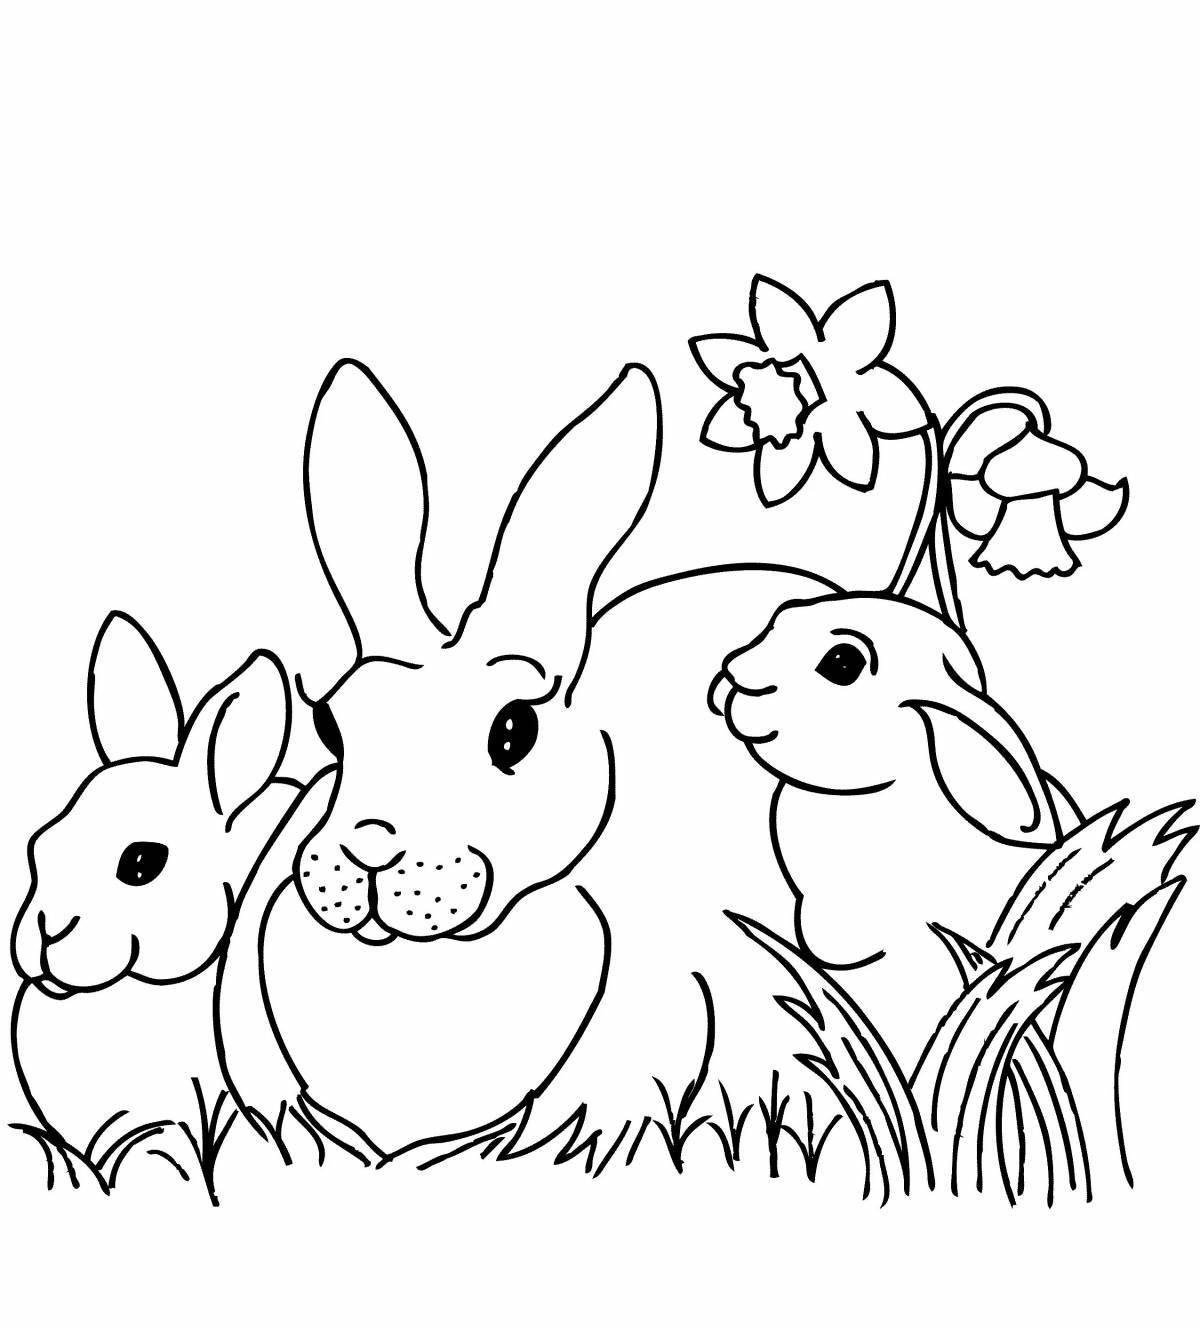 Hare with bunnies #5